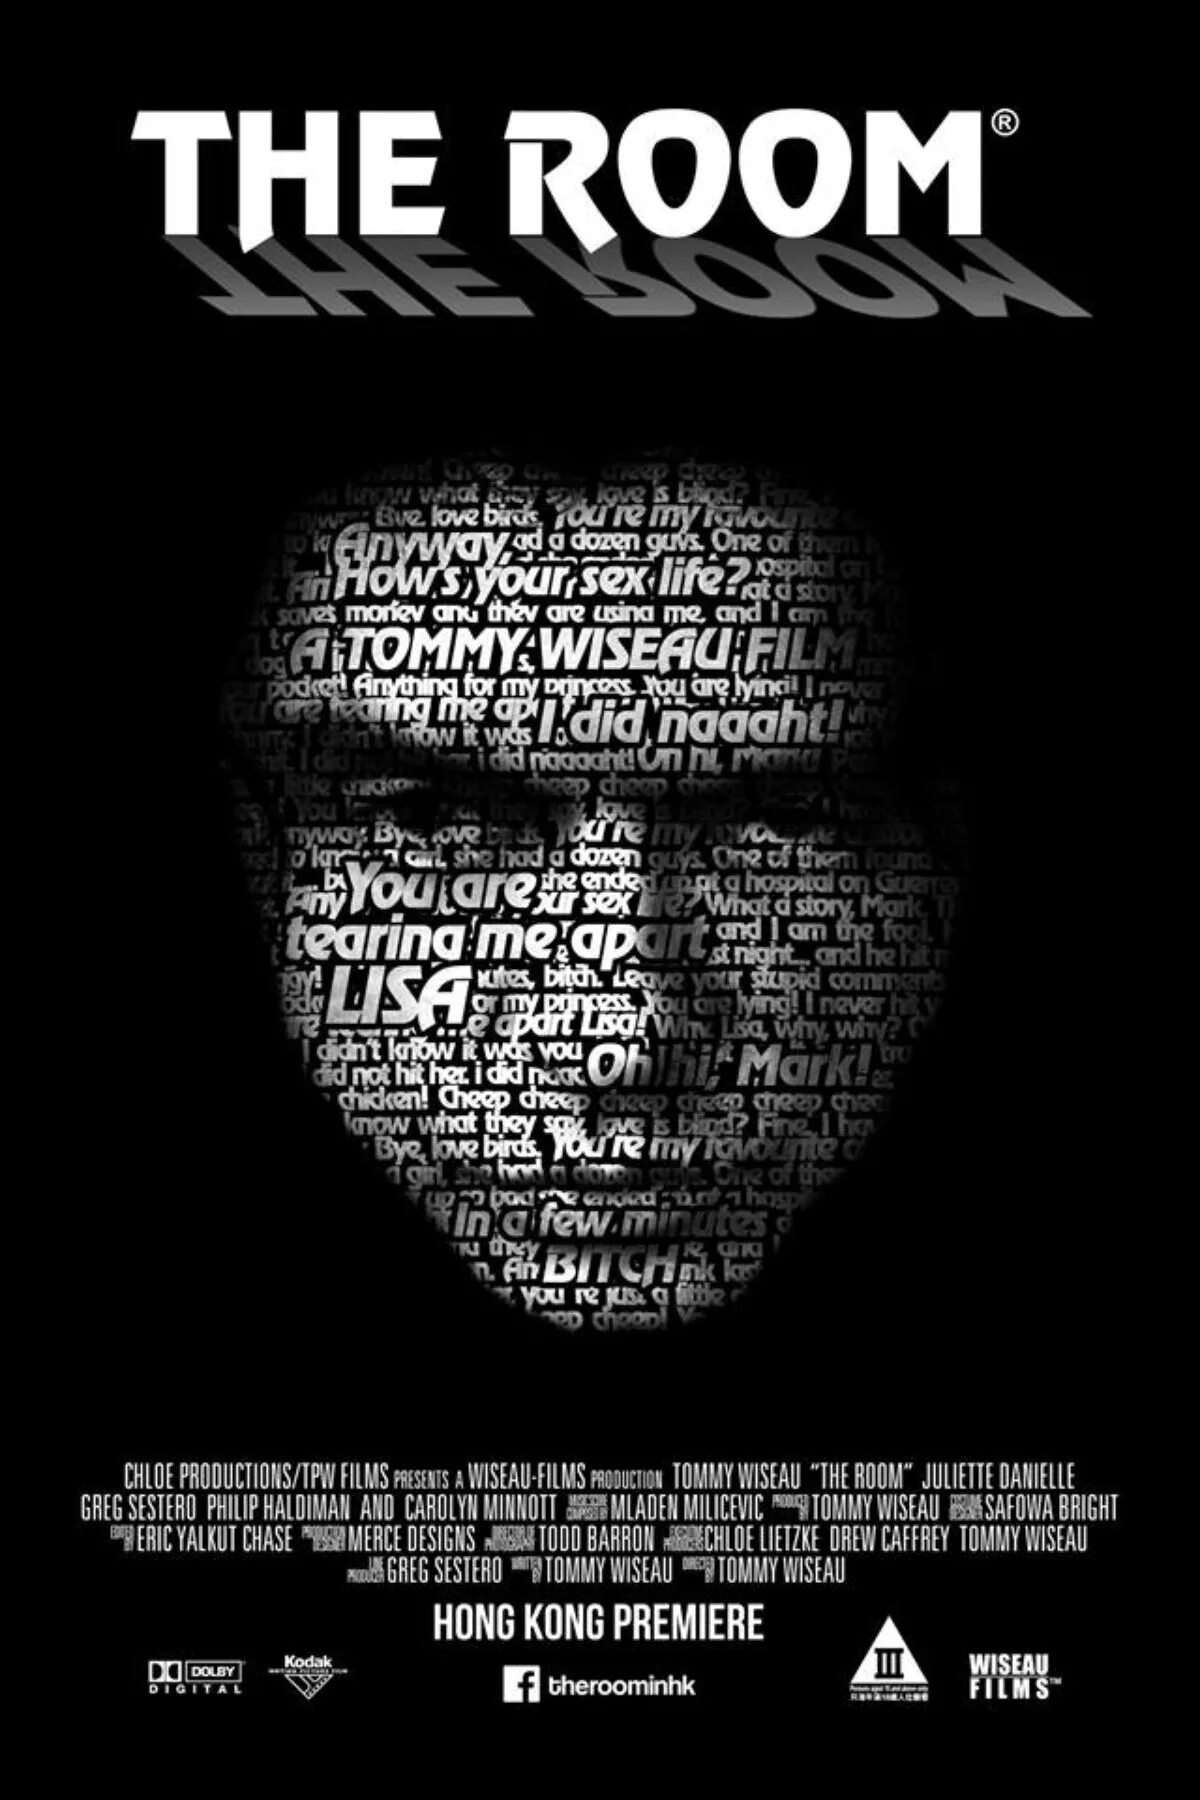 The room poster. Комната Томми Вайсо Постер. «Комната» (the Room), 2003 критики.